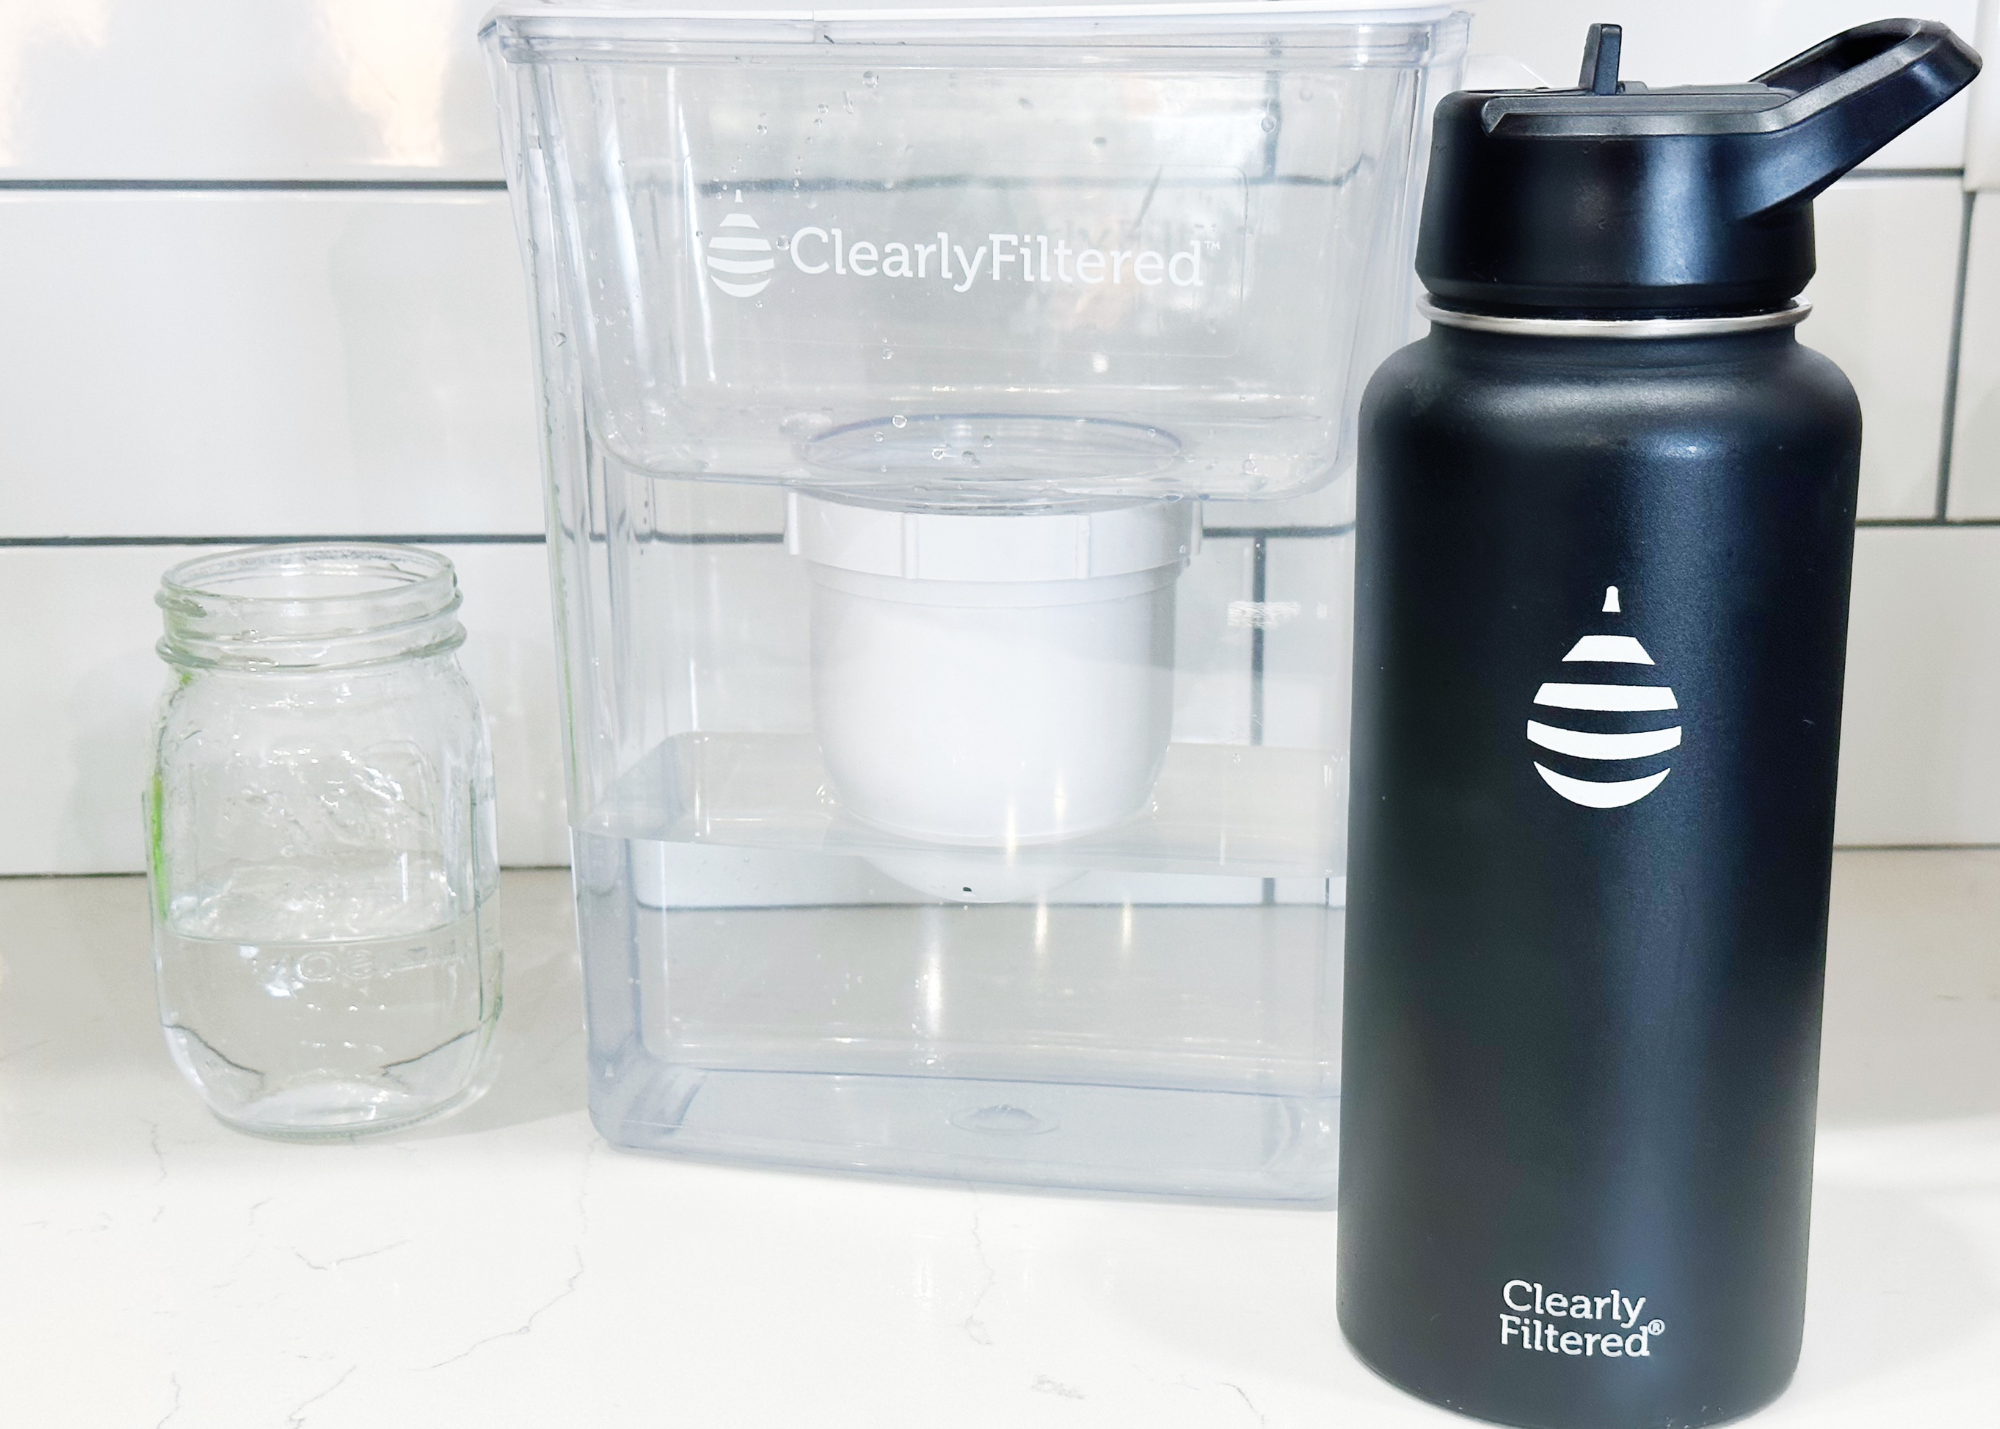 Clearly Filtered Water Pitcher Review